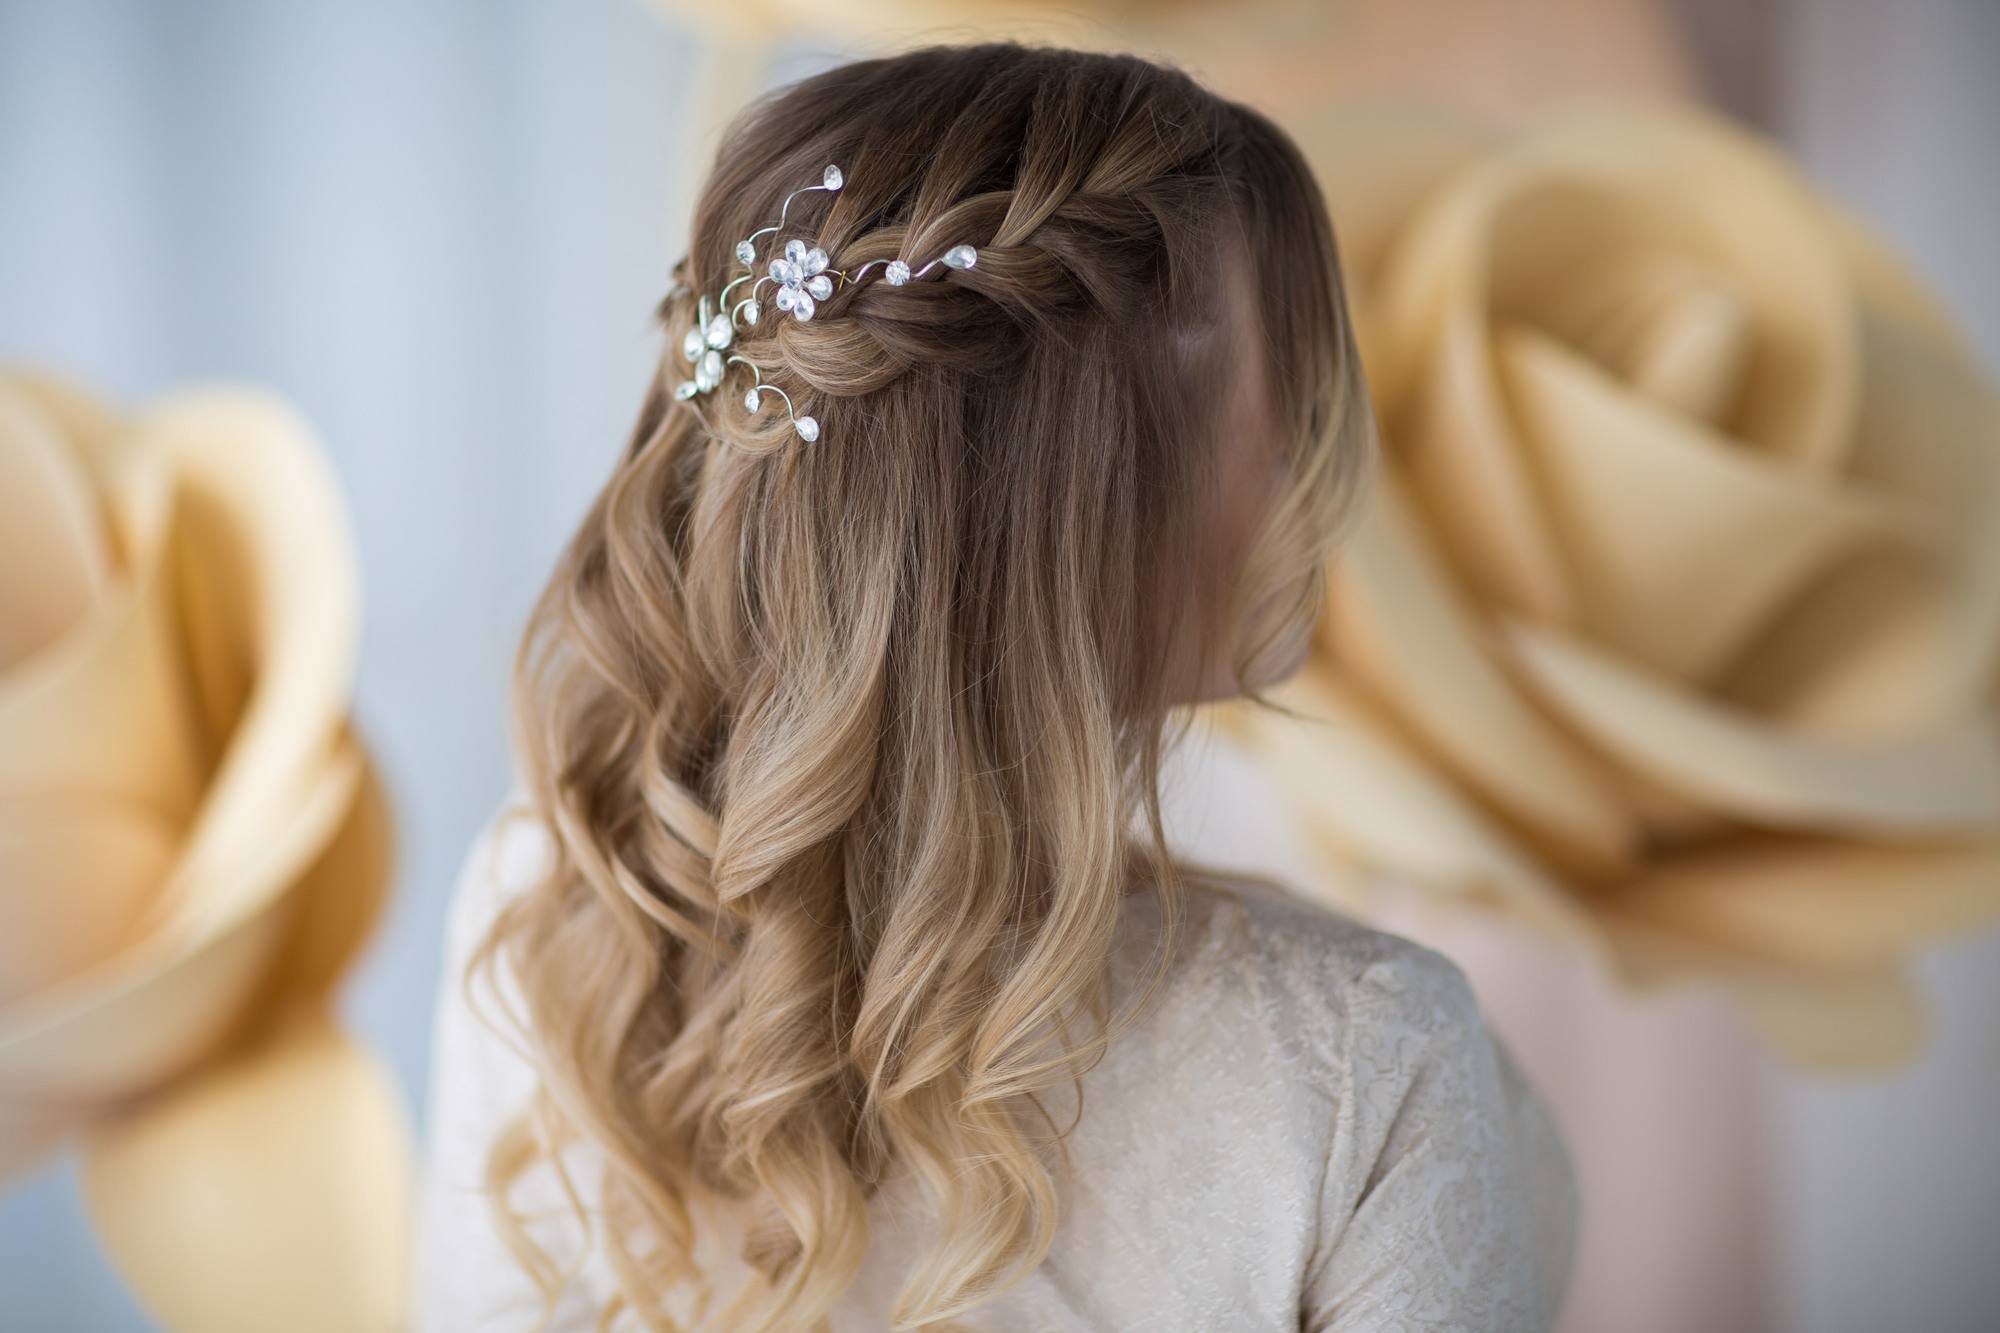 Engagement-Party Hairstyles to Steal from Celebs